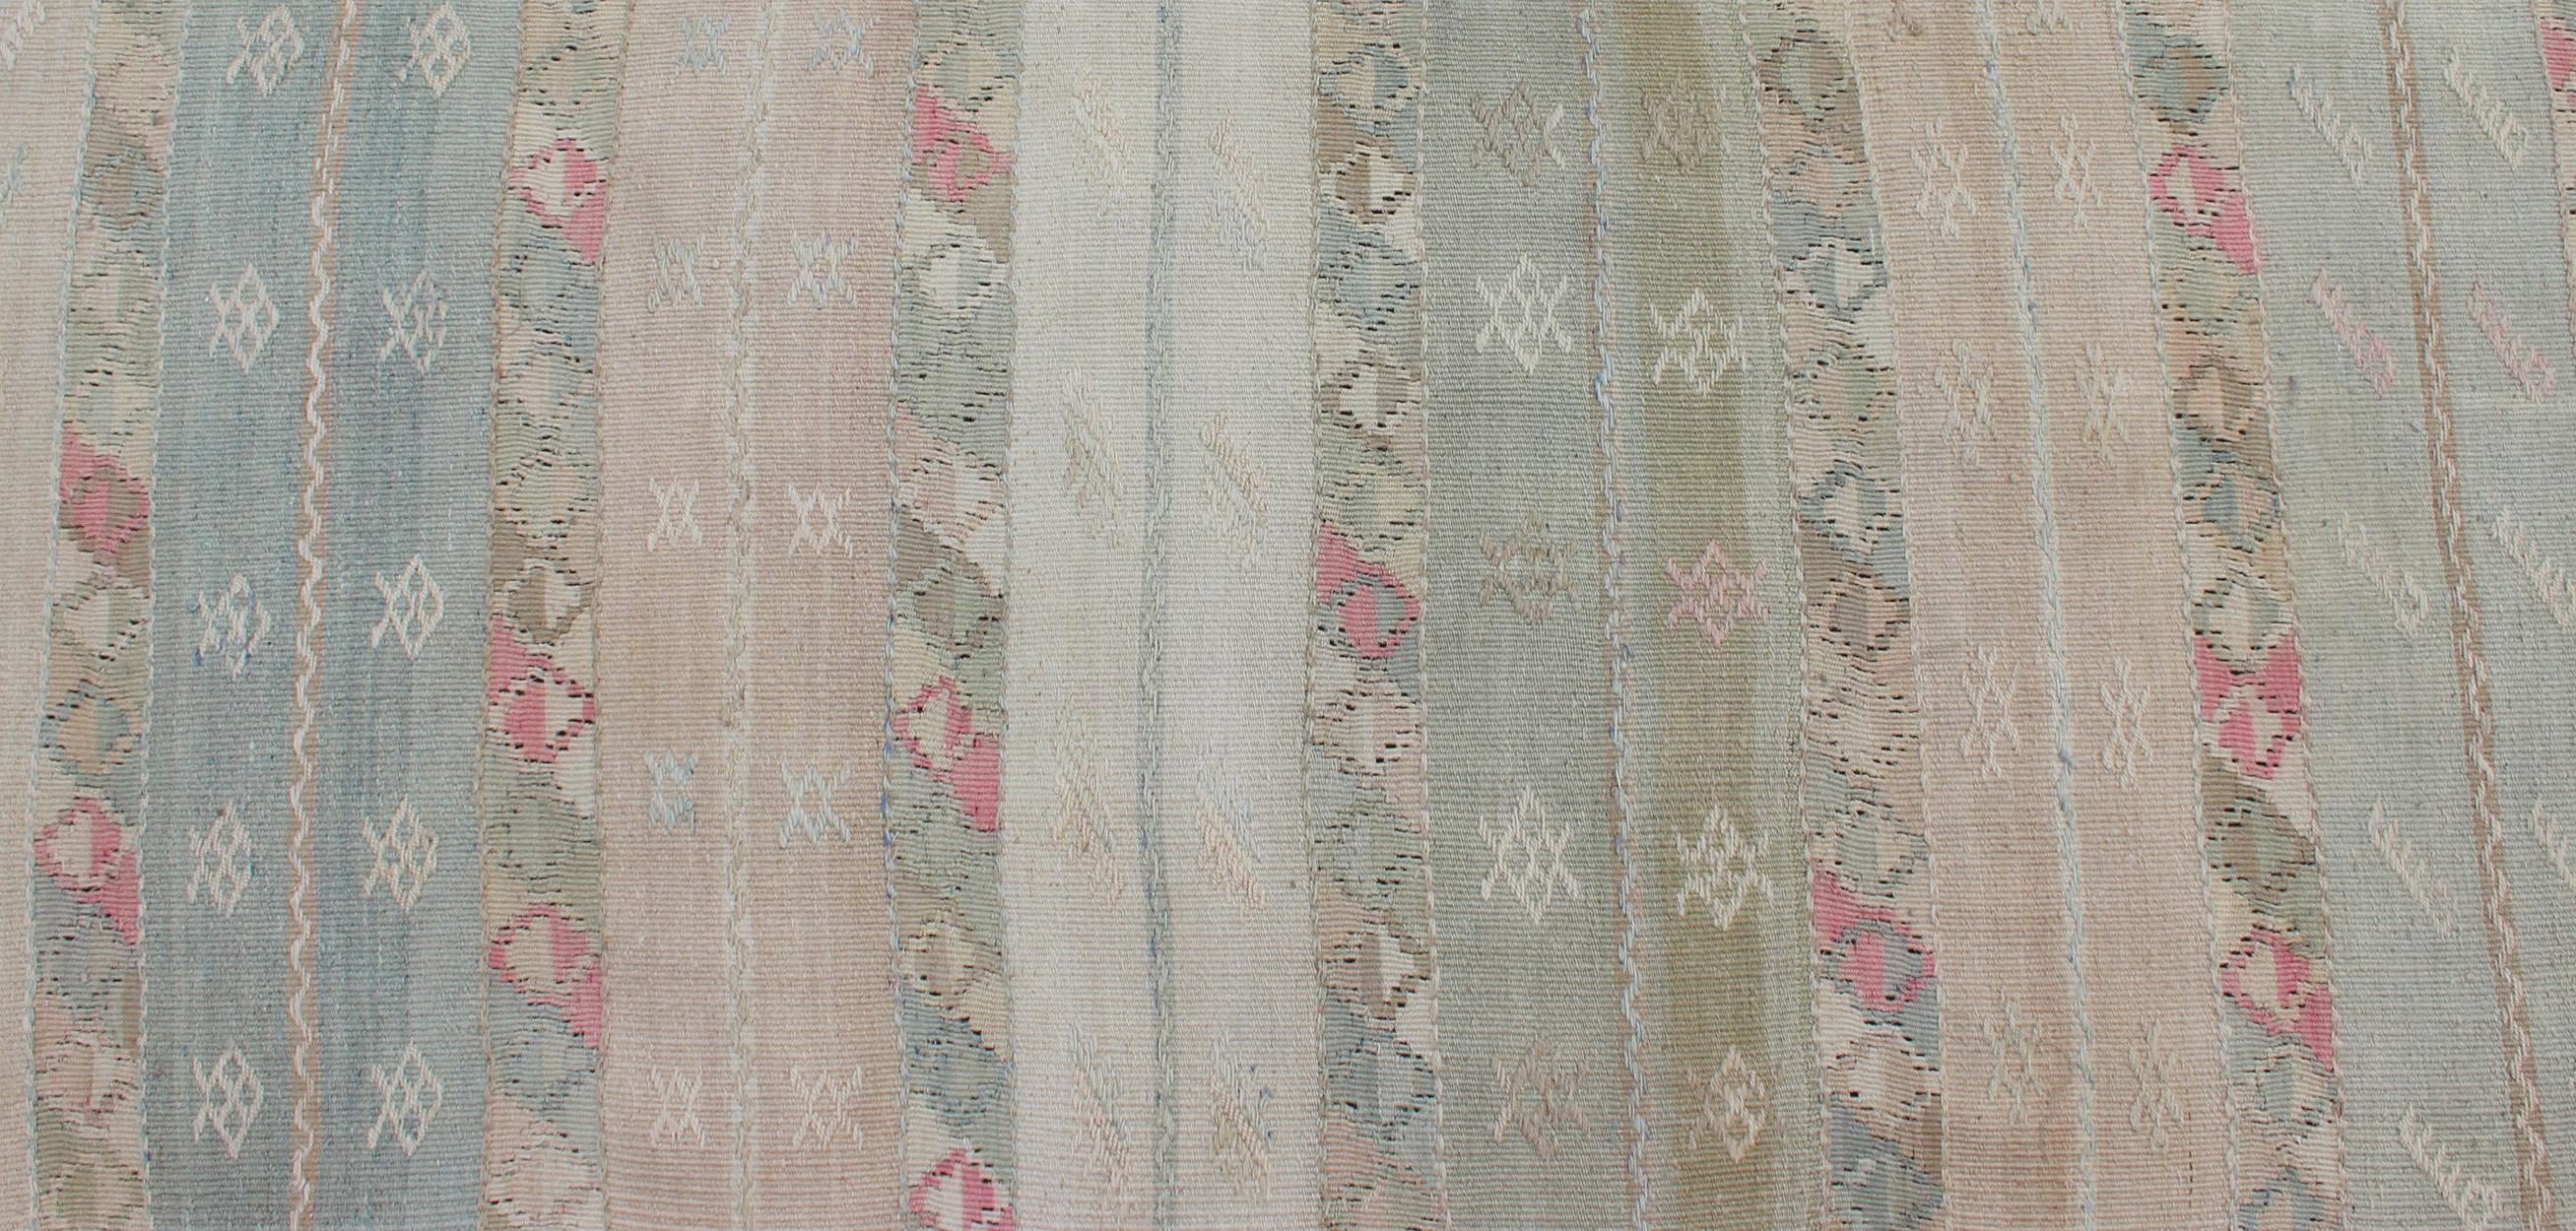 20th Century Vintage Turkish Long Kilim Runner with a Stripe Design in Muted Colors